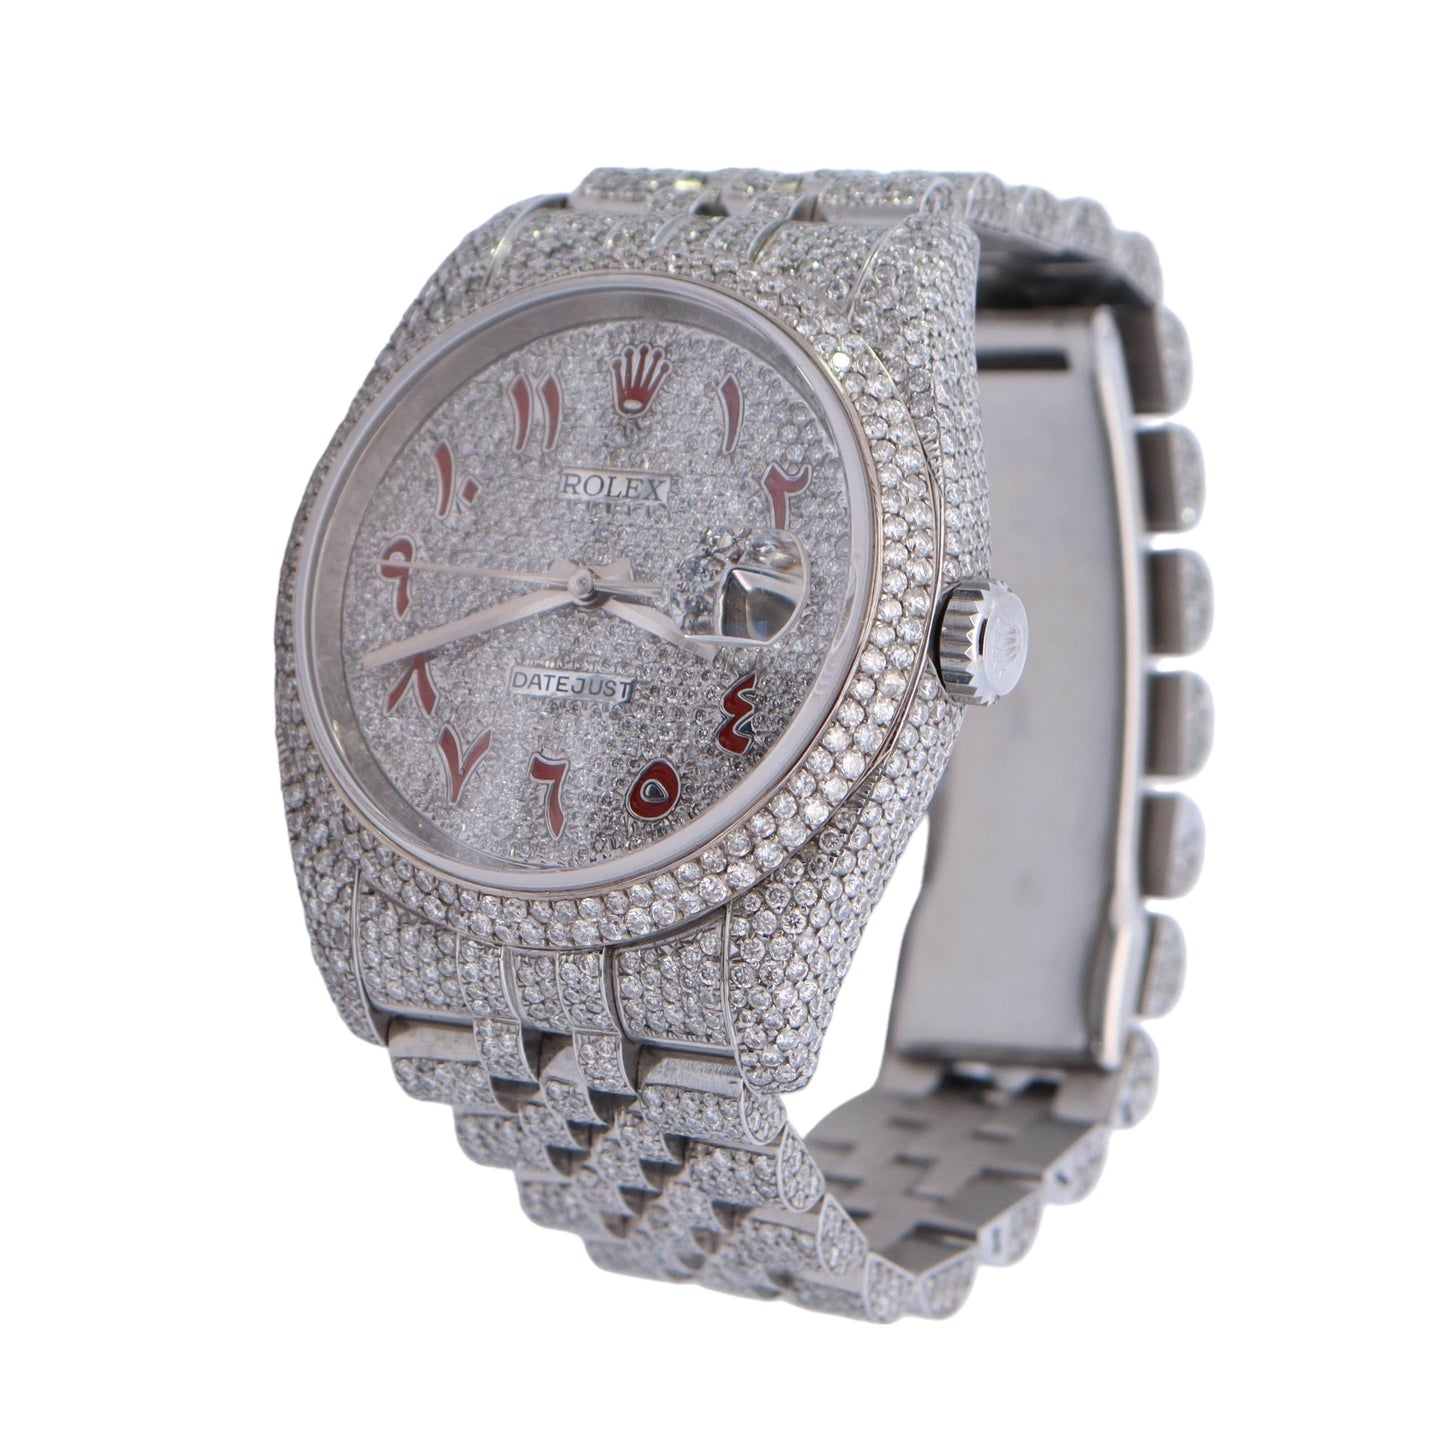 Rolex Datejust36mm Iced Out Stainless Steel Custom Pave Arabic Dial Watch Reference #: 116234